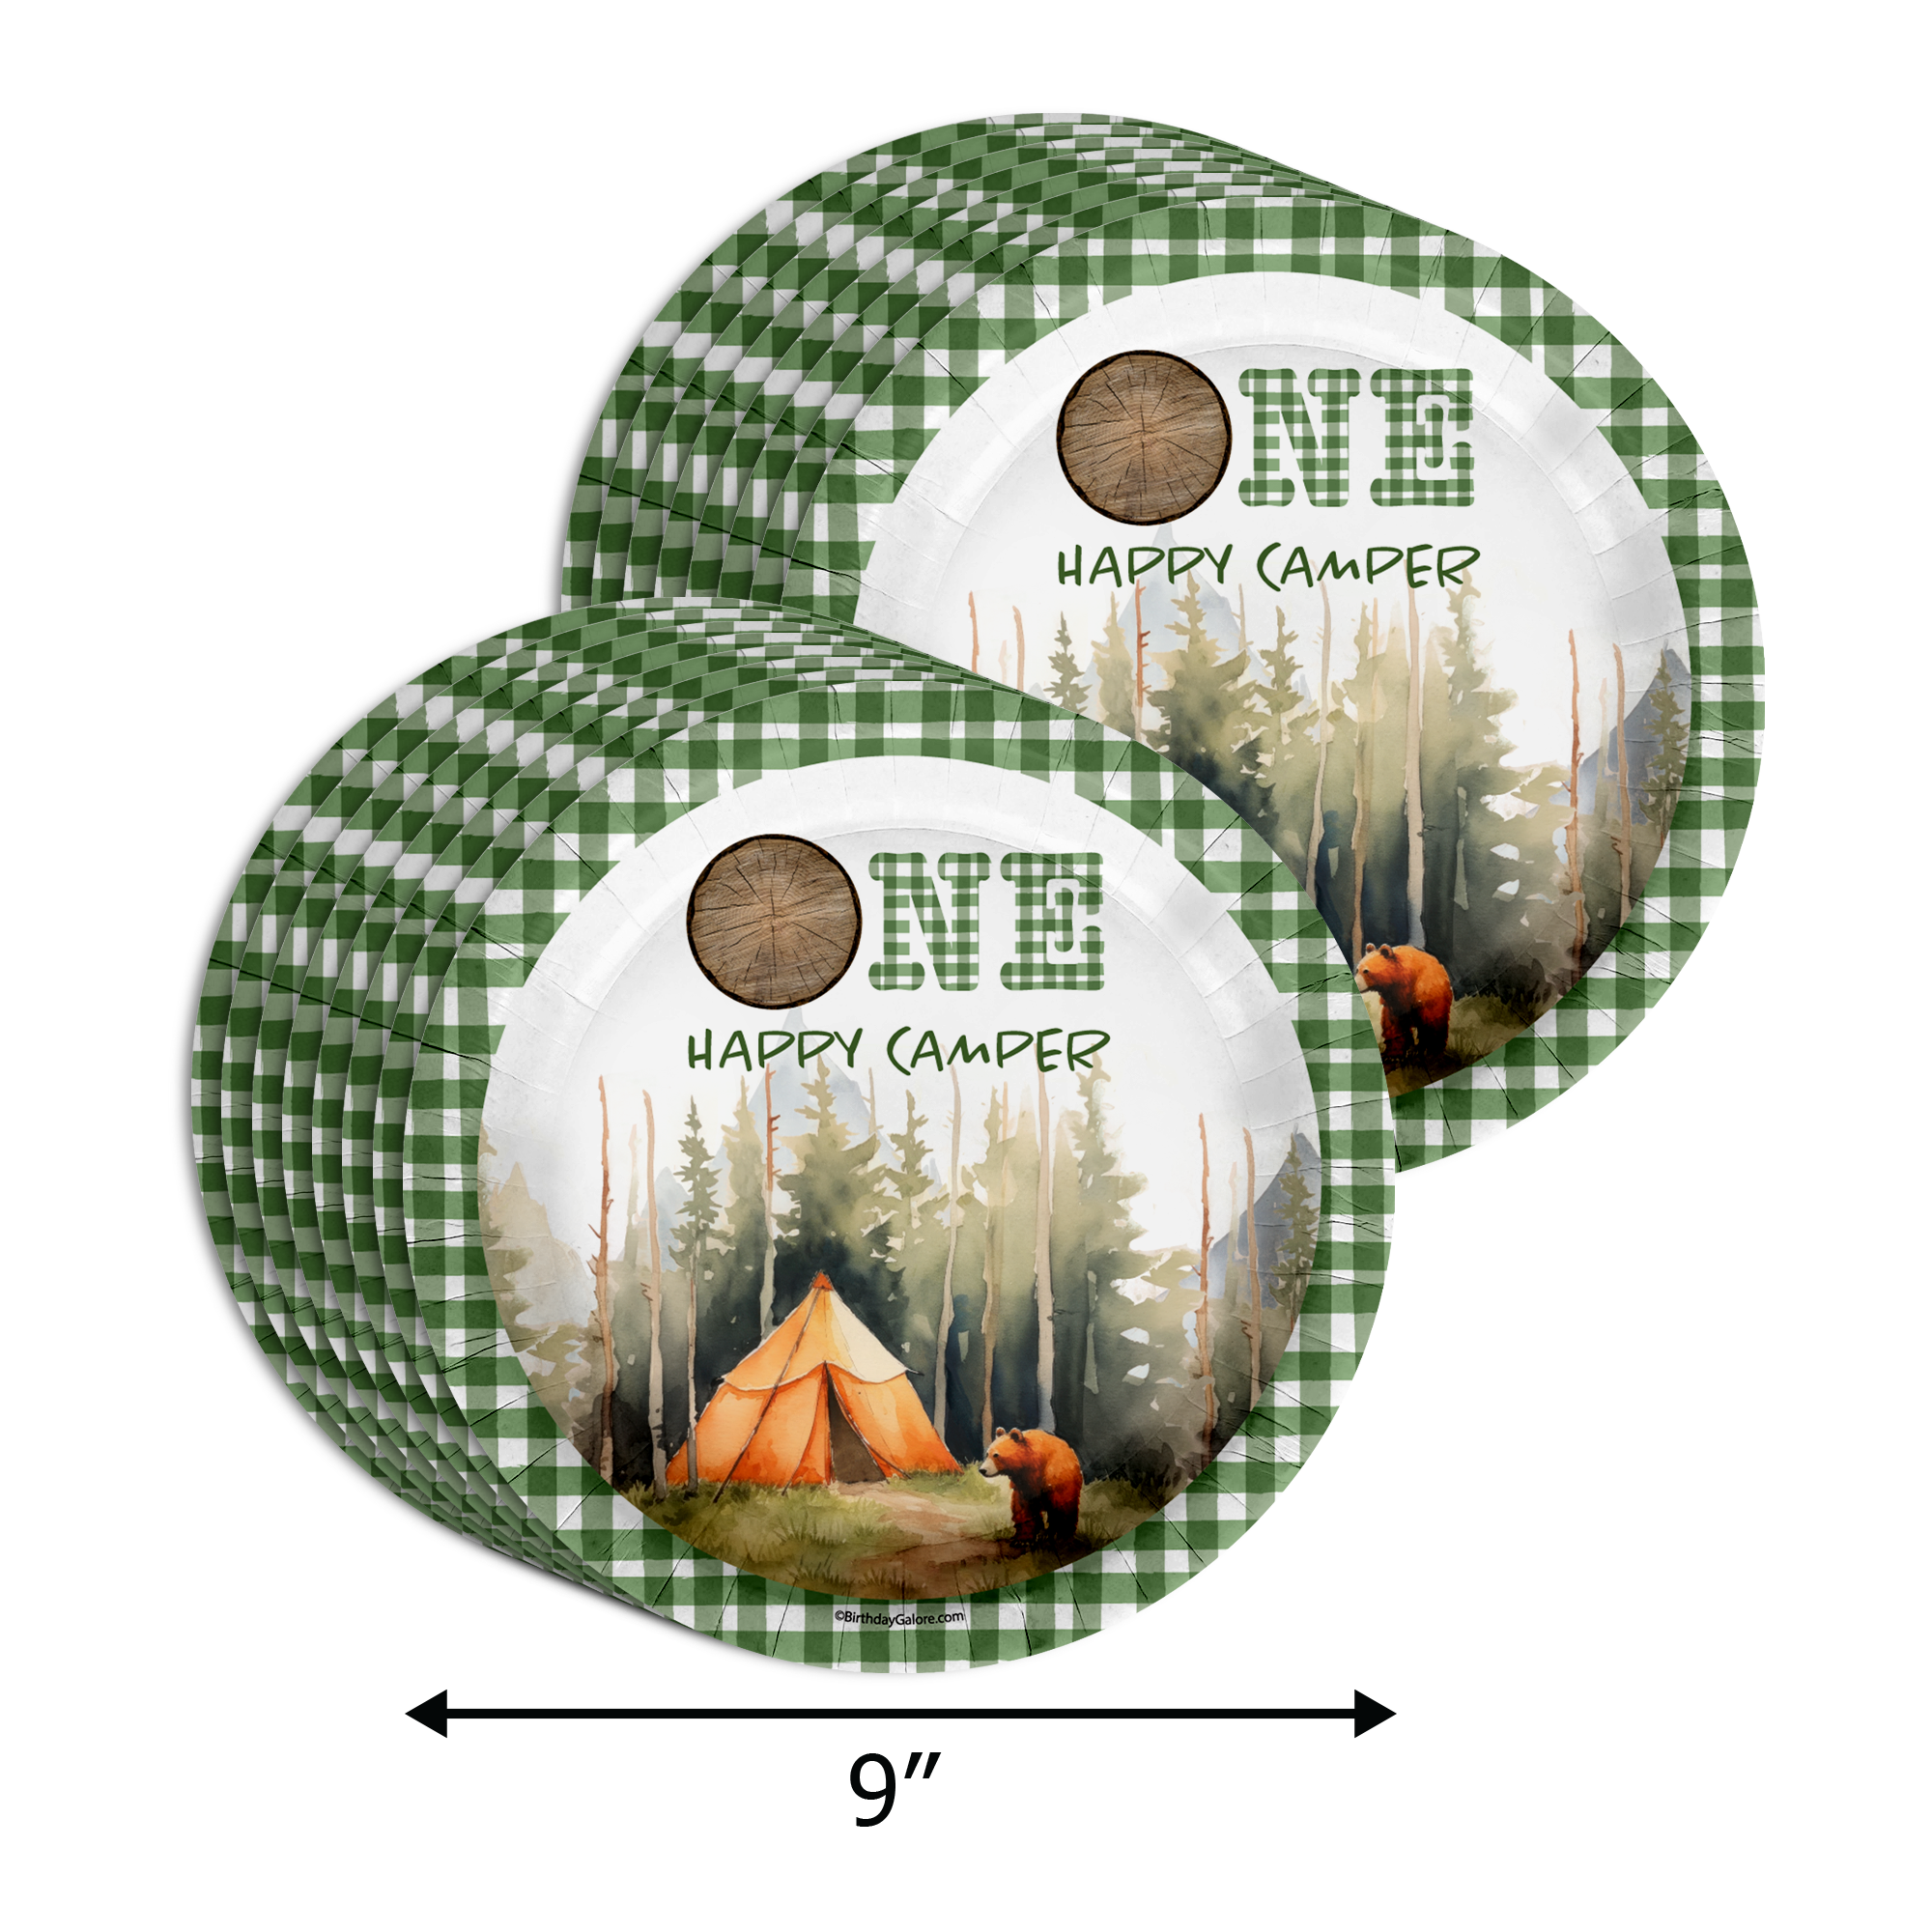 One Happy Camper Camping Boys 1st Birthday Party Supplies 64 Piece Tableware Set Includes Large 9" Paper Plates Dessert Plates, Cups and Napkins Kit for 16